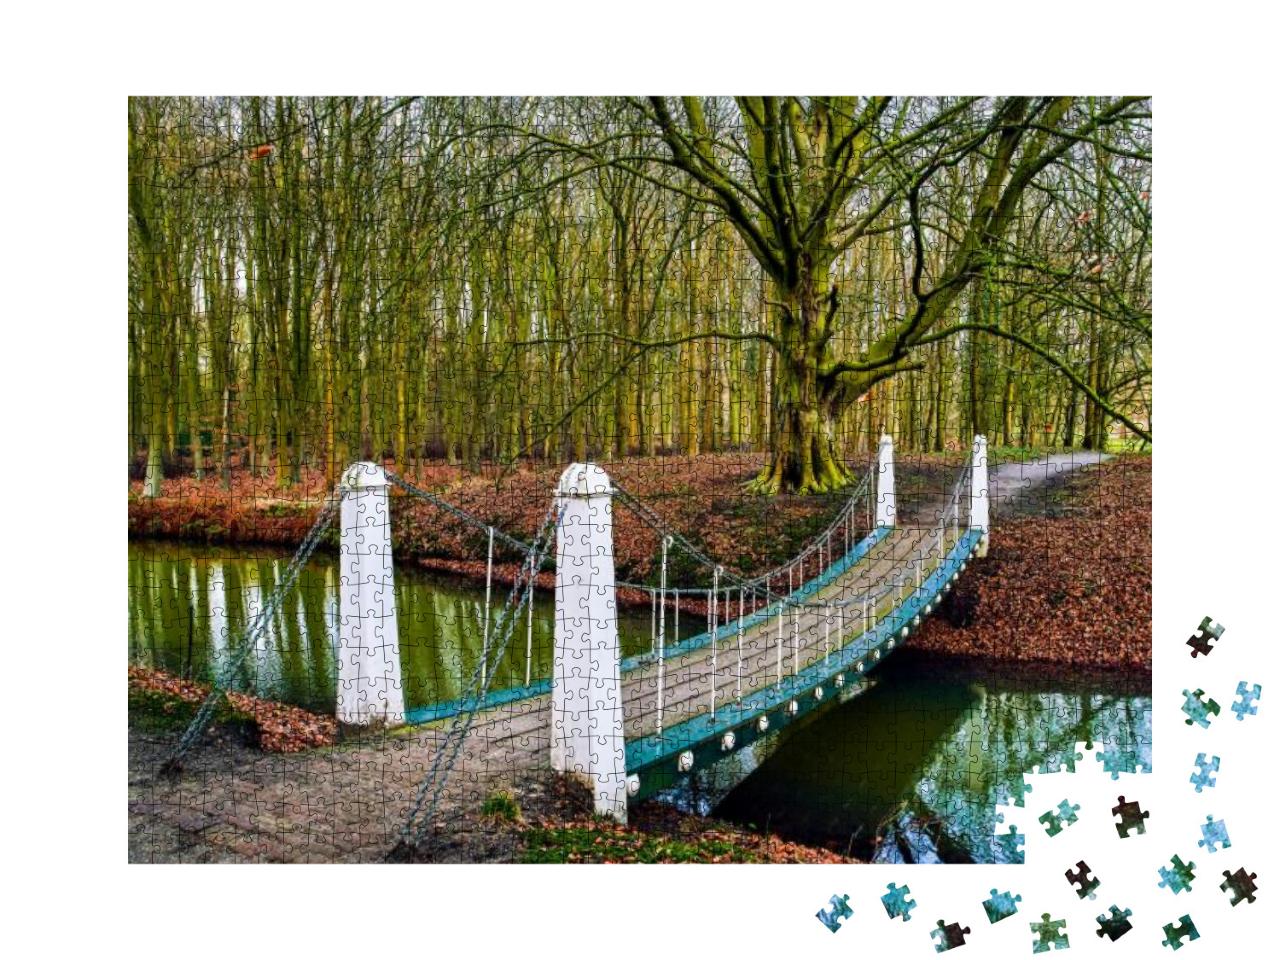 A Bridge Across the River in the Autumn Park. River Bridg... Jigsaw Puzzle with 1000 pieces